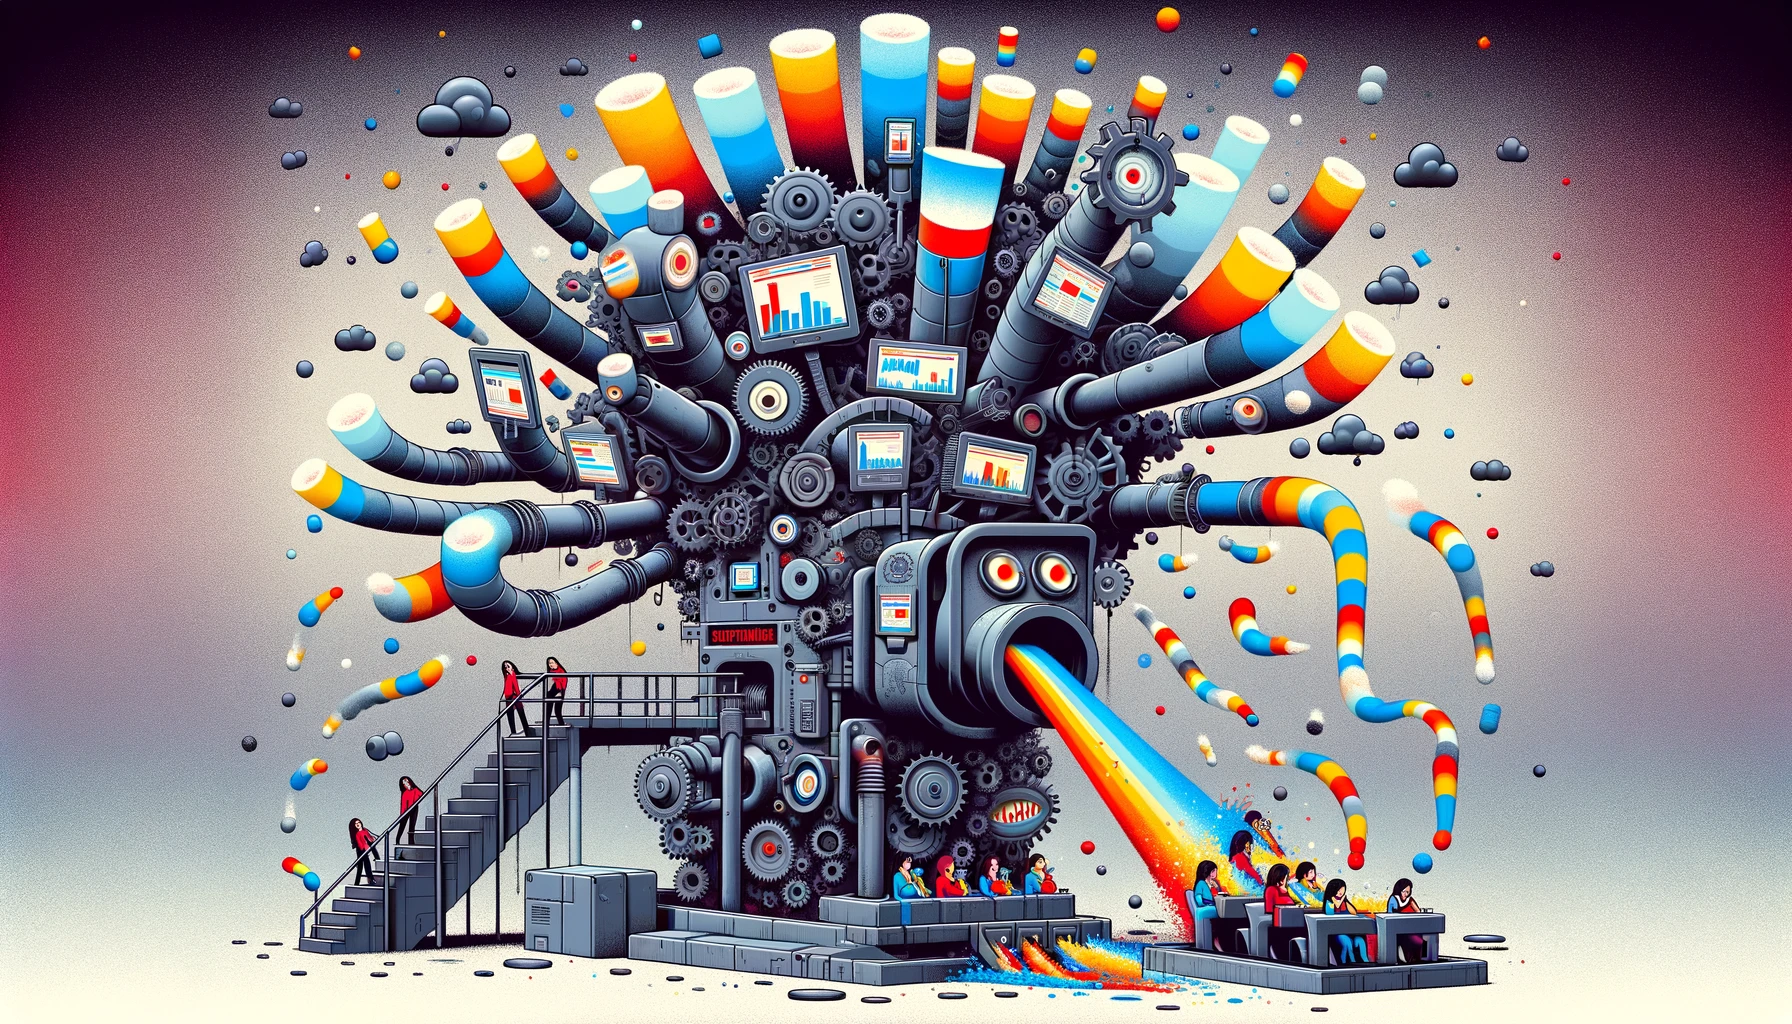 A surreal representation of the digital era's climax, where users are depicted as digital avatars being force-fed content by a colossal, mechanical behemoth. This machine, symbolizing Big Tech, is fueled by outrage and engagement, its machinery adorned with rising shareholder value graphs, all portrayed in an imaginative color scheme of Light Gray, Dark Gray, Bright Red, Yellow, and Blue.